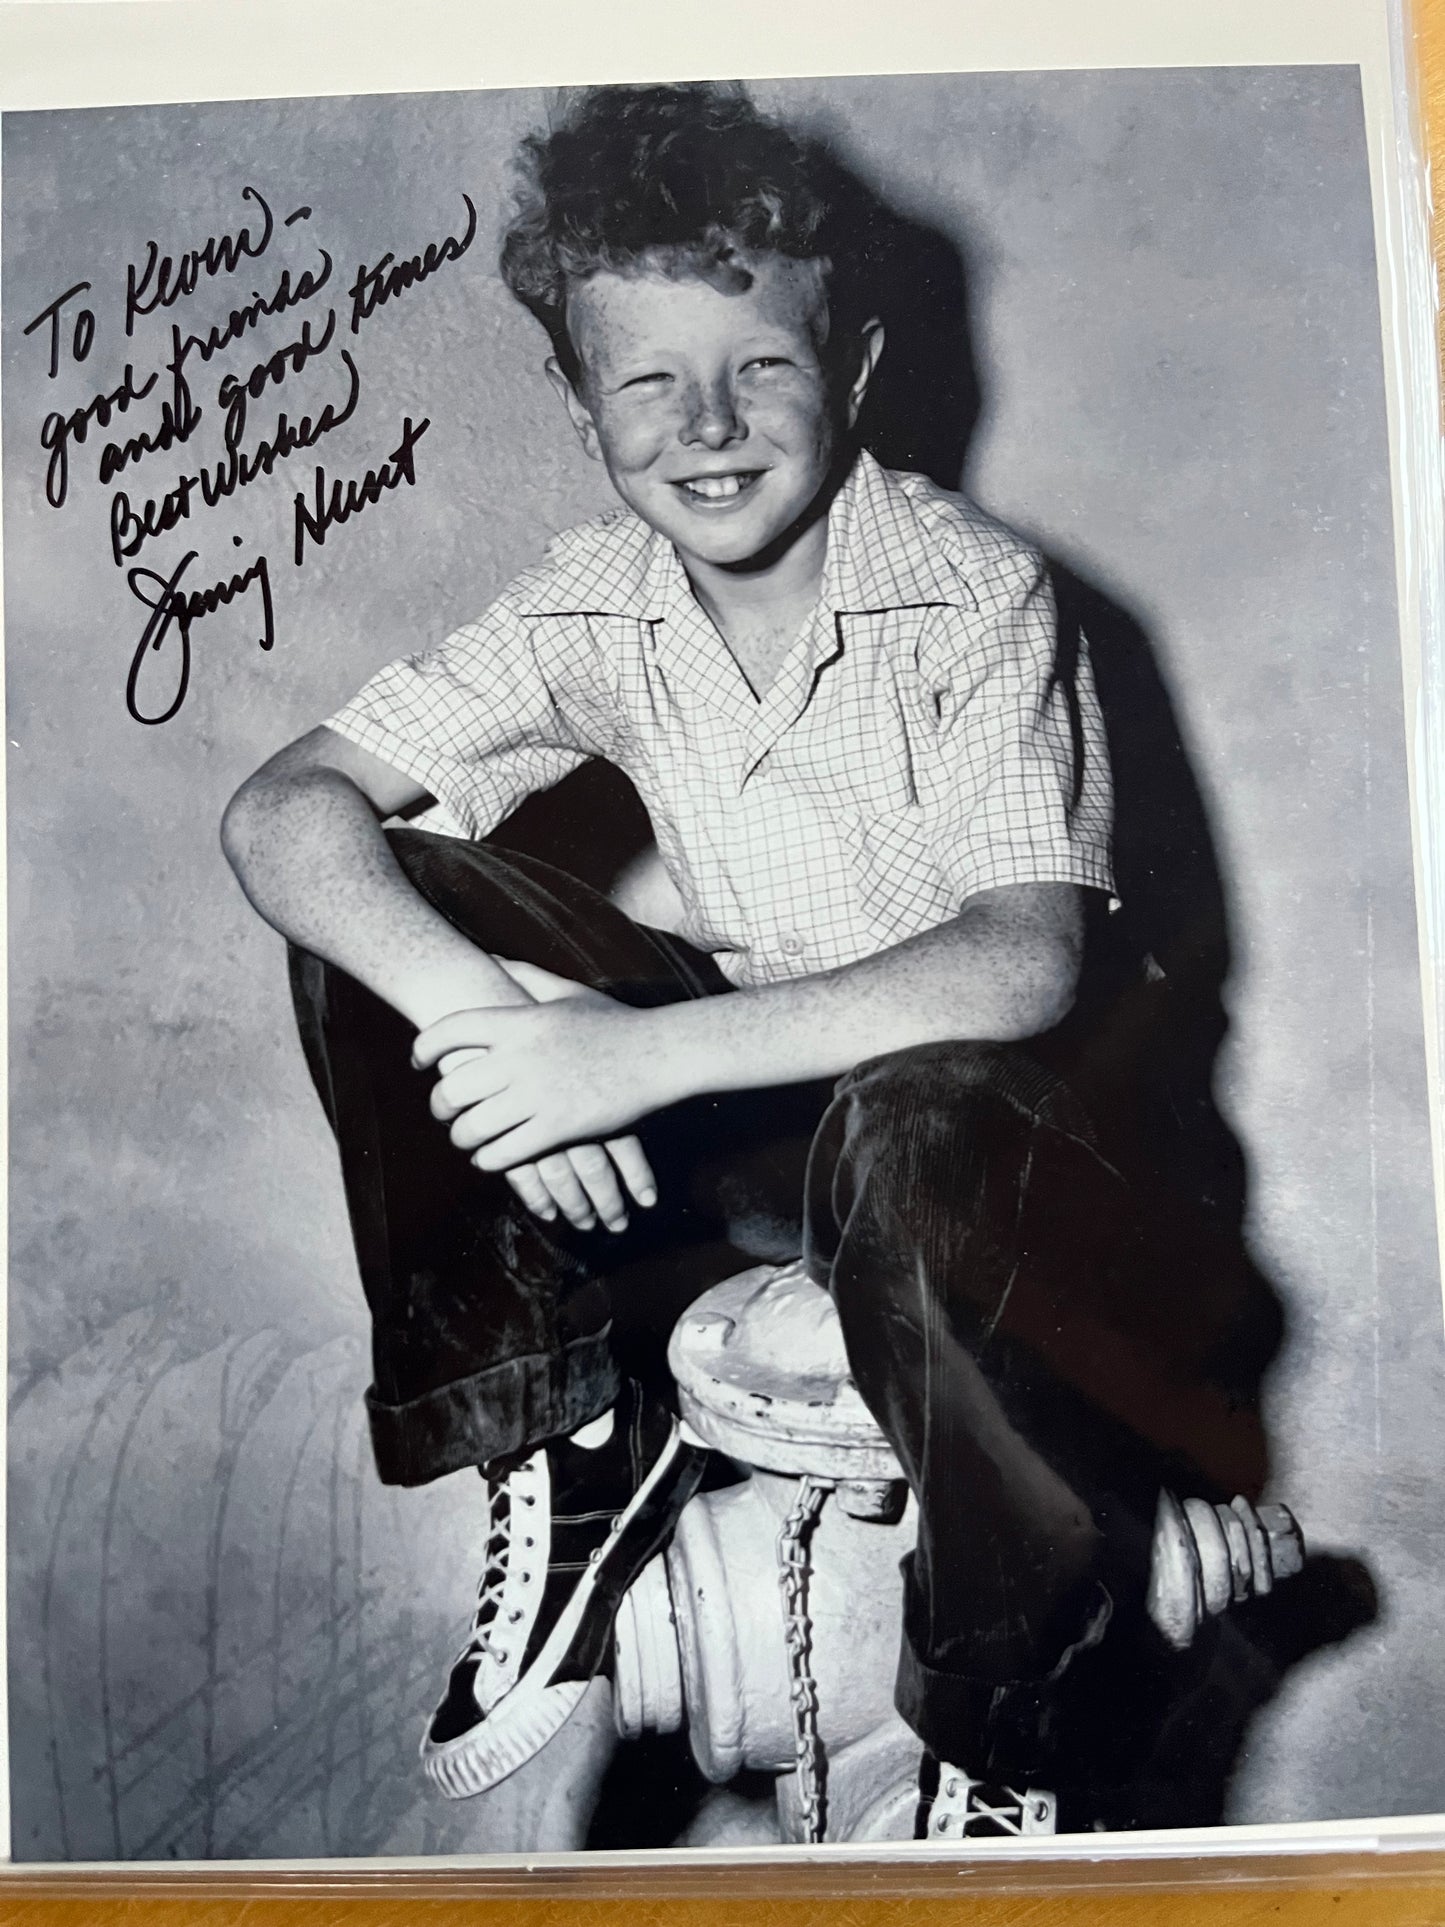 JIMMY HUNT, Invaders from Mars (1953), autograph